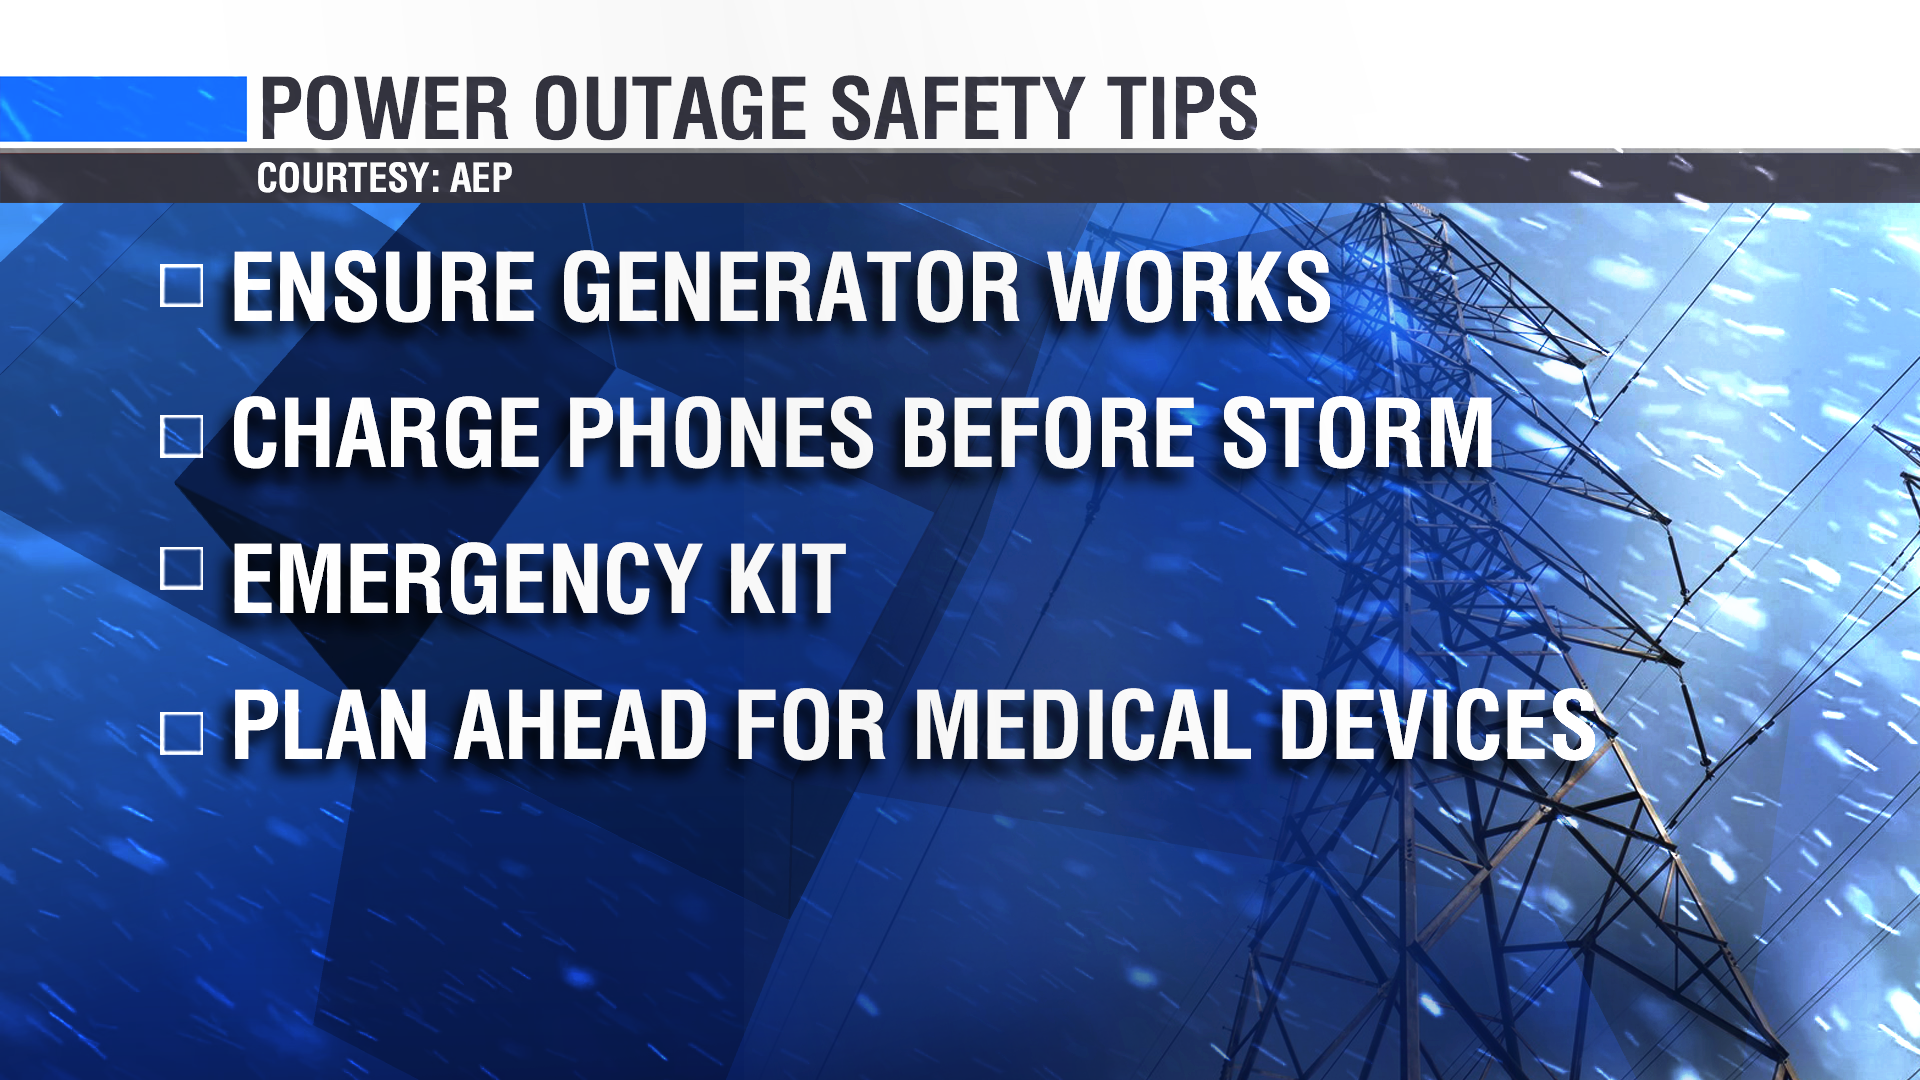 Power outages and storm safety